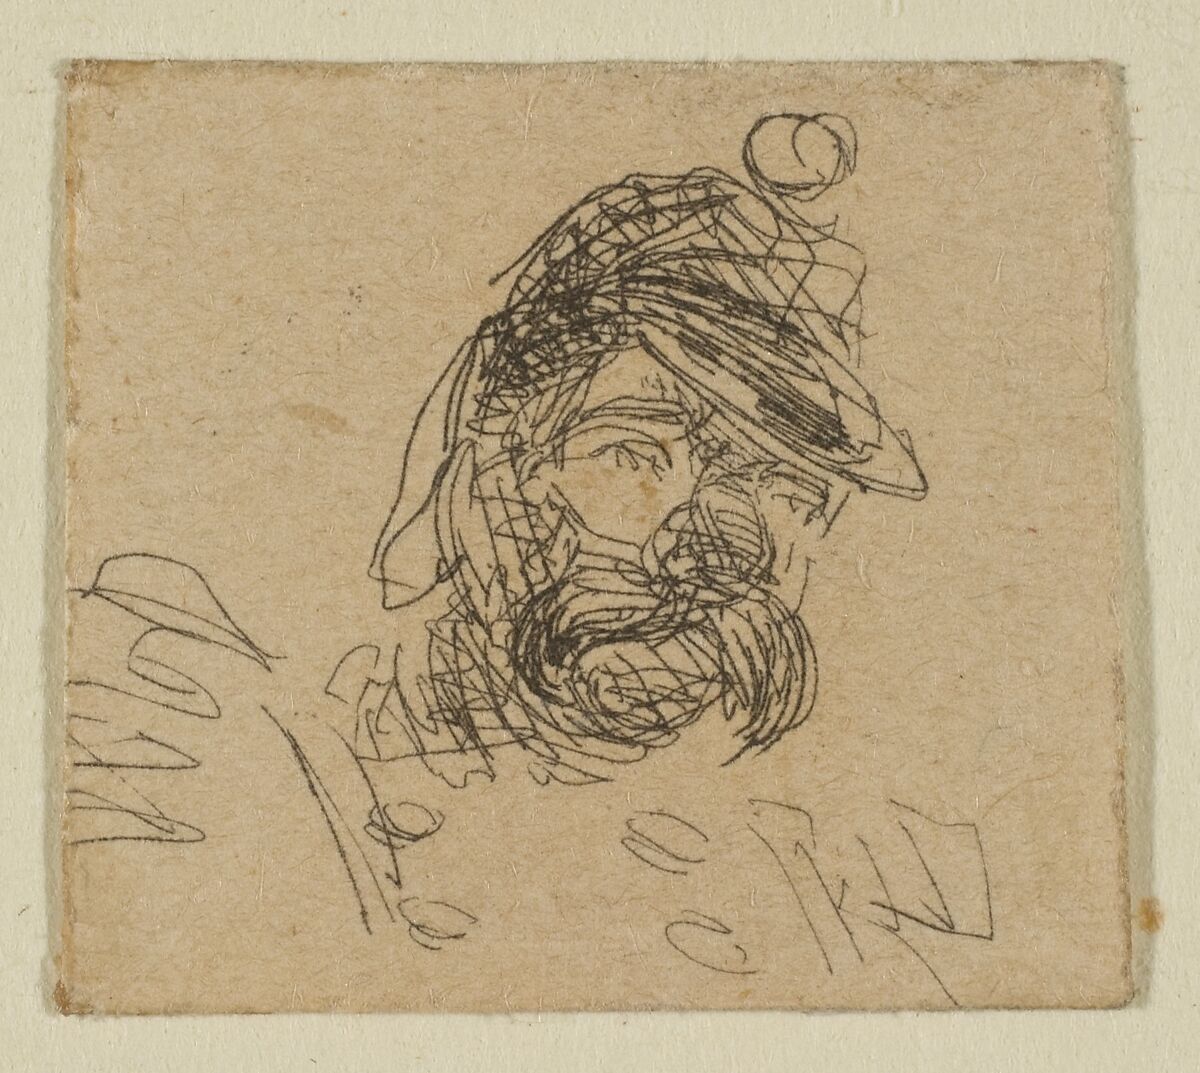 Bearded Man in Soldier's Cap (from Sketches on the Coast Survey Plate), James McNeill Whistler (American, Lowell, Massachusetts 1834–1903 London), Etching; proof impression of the only state (Glasgow 1); this is a fragment cut from the upper portion of "Sketches on the Coast Survey Plate" (Kennedy no. 1) by Whistler and mounted on a board with six other related fragments. Cited by Glasgow as the earliest known impression. 